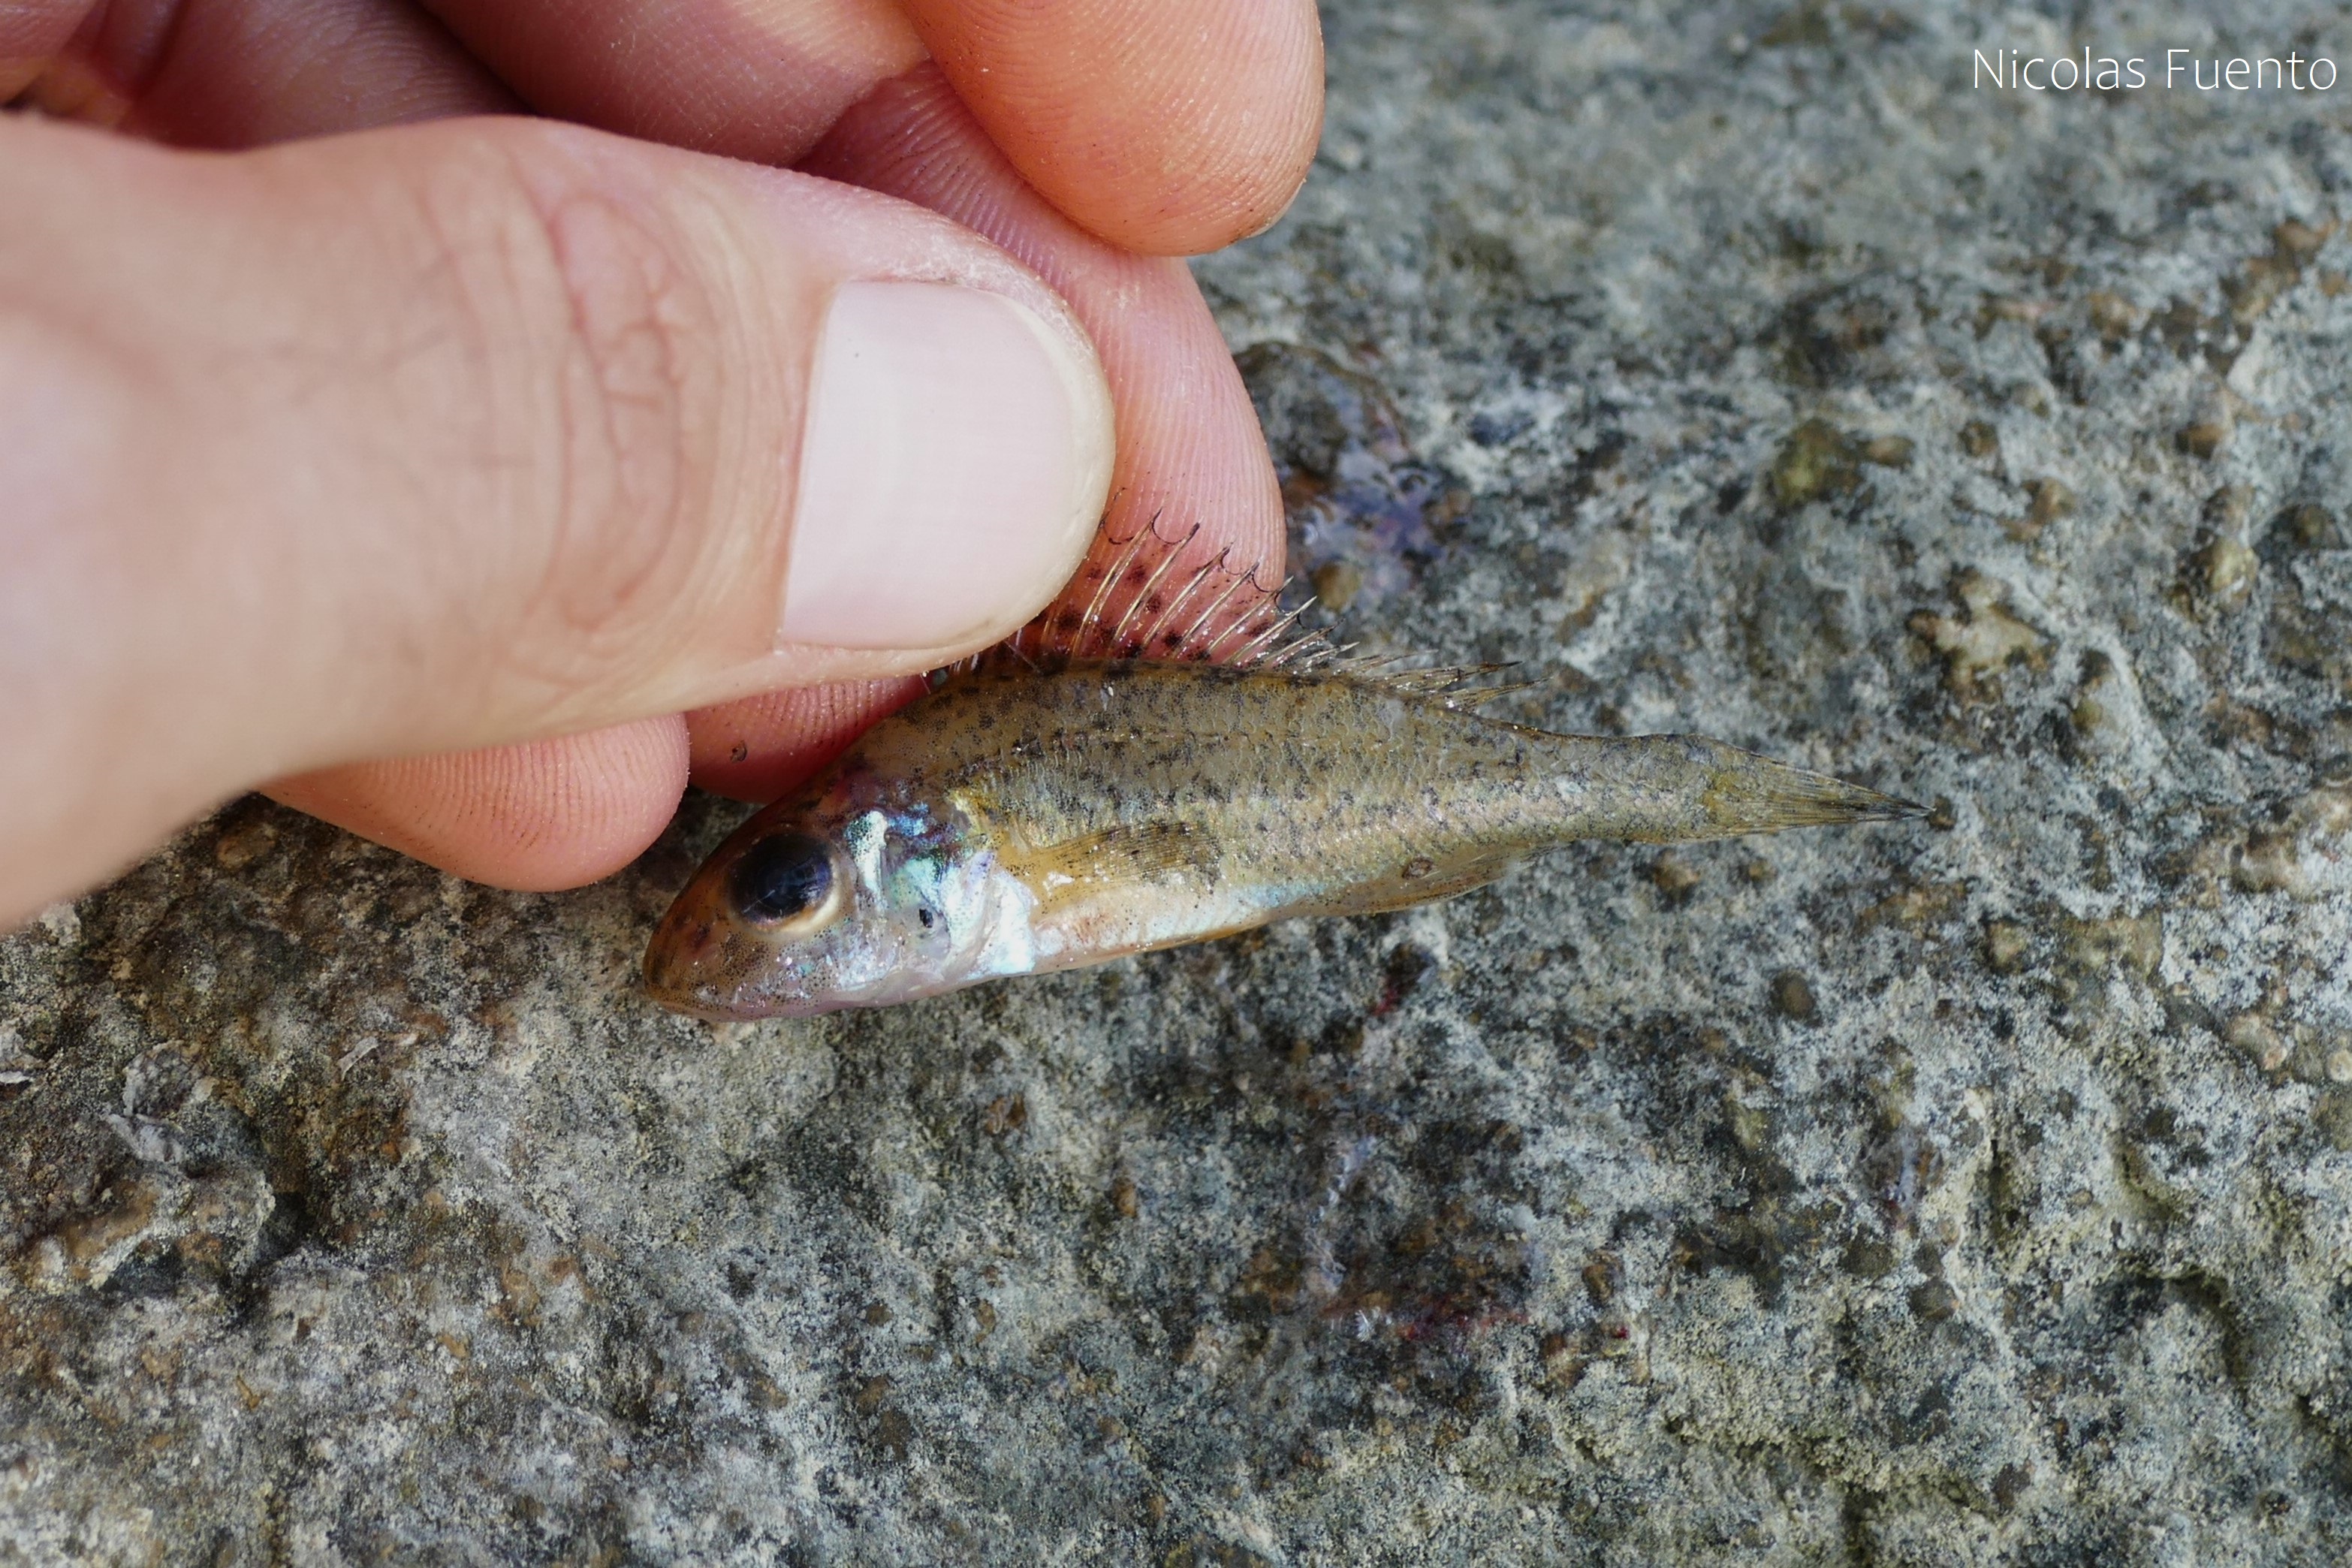 The fish after removal from the snake's mouth. Dorsal spines visible and held by fingers. Grey rock background.